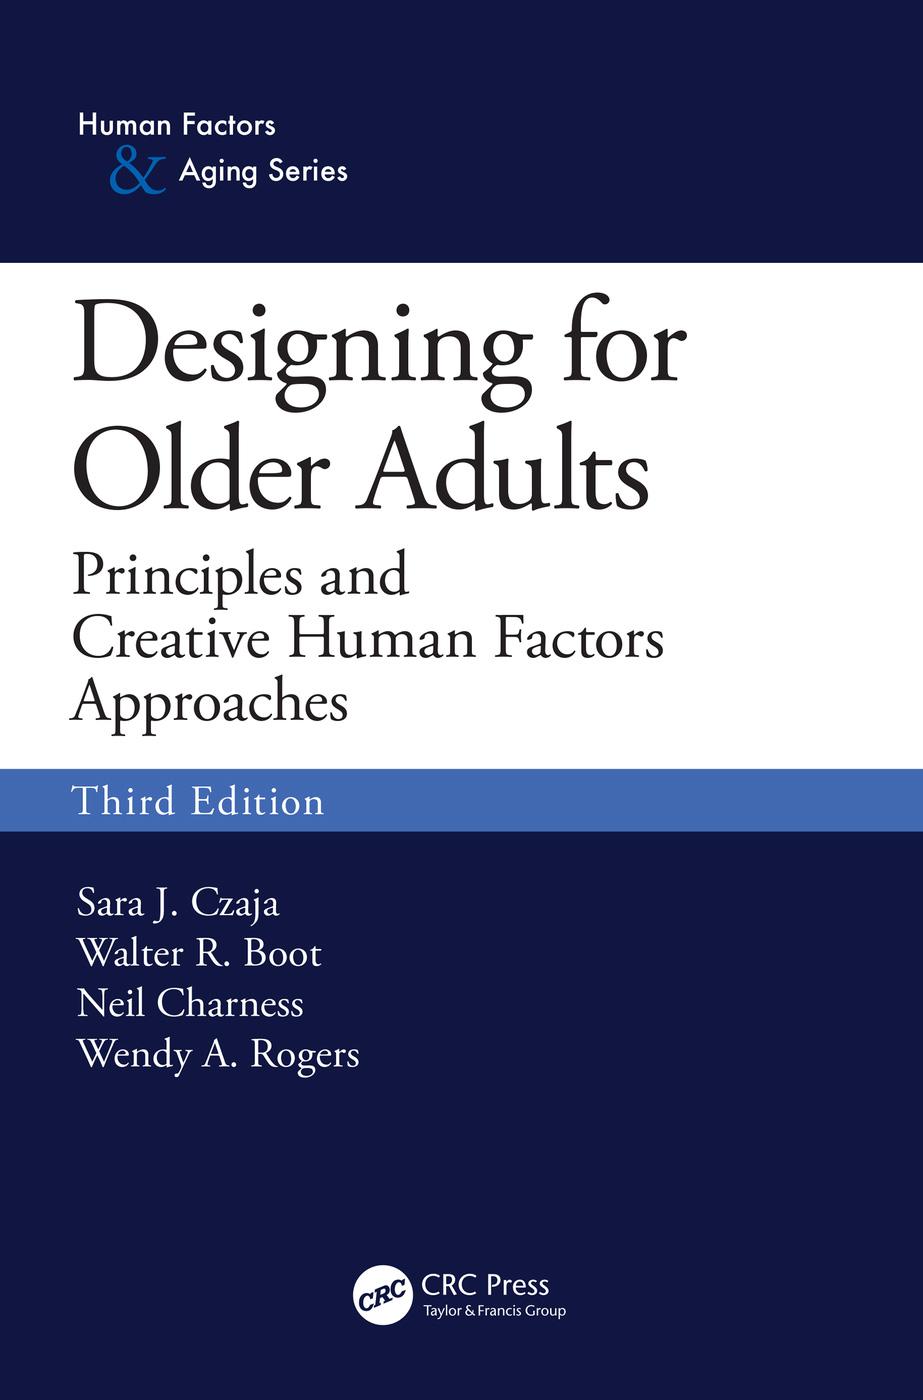 Designing for Older Adults: Principles and Creative Human Factors Approaches